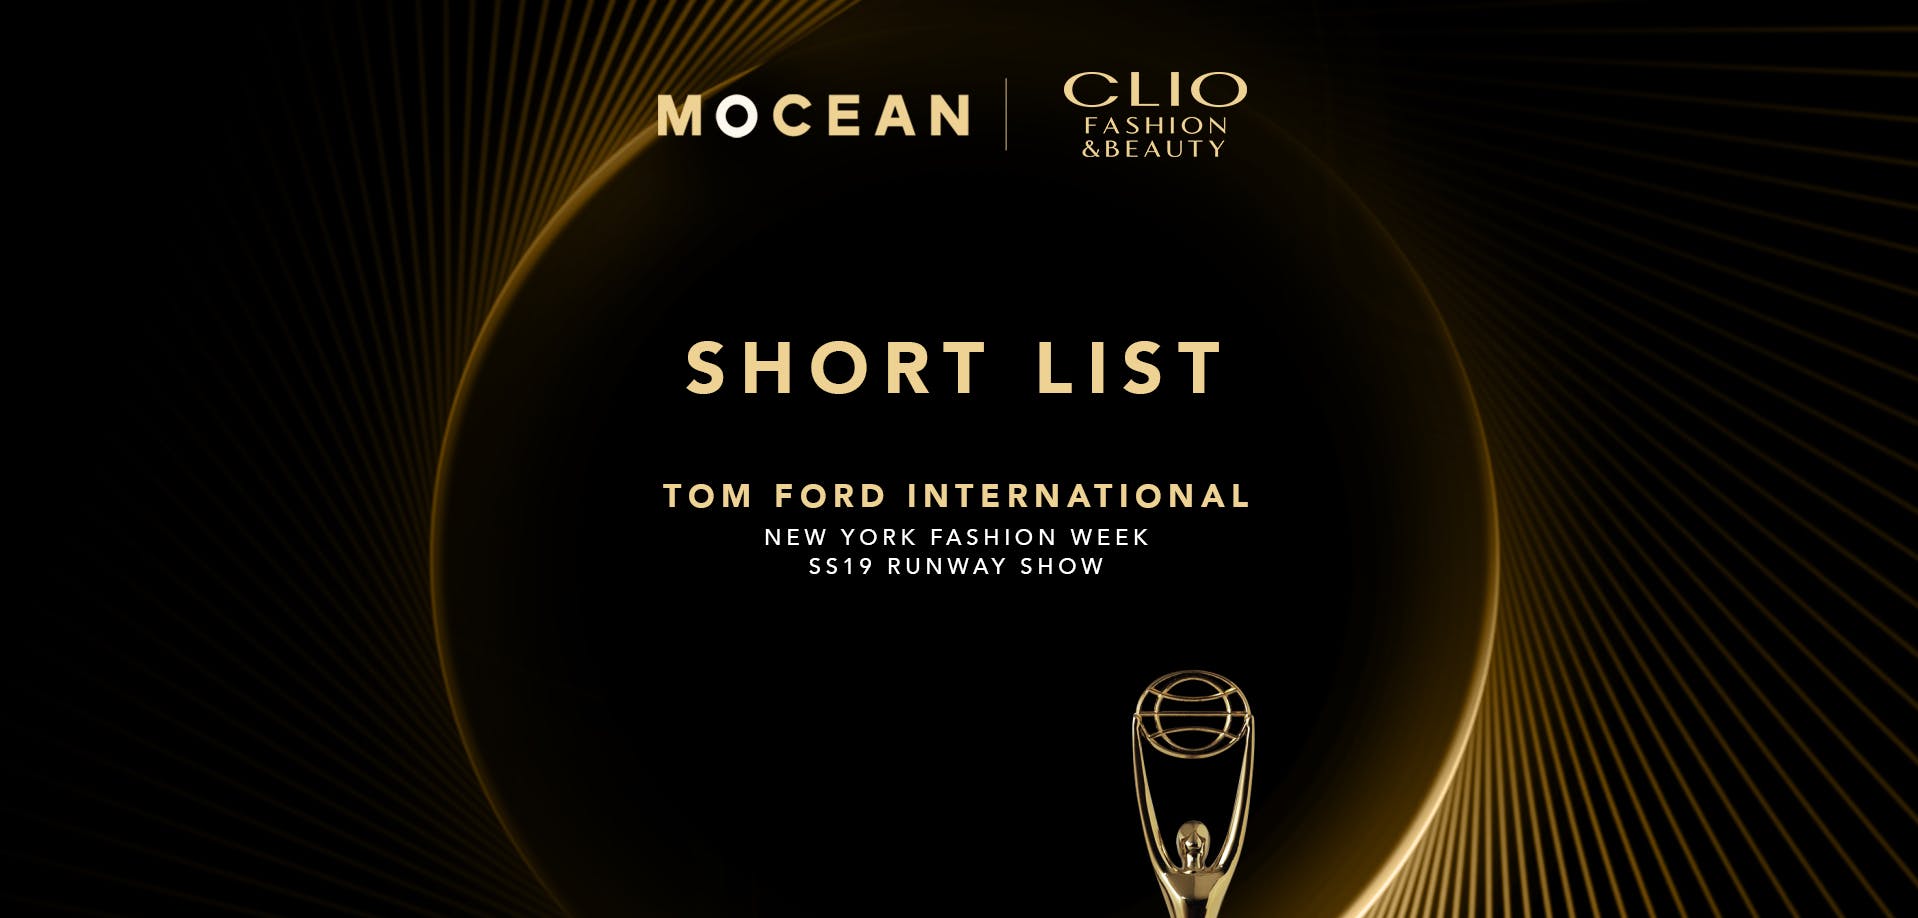 MOCEAN Shortlisted for 2019 CLIO Fashion & Beauty Awards hero image